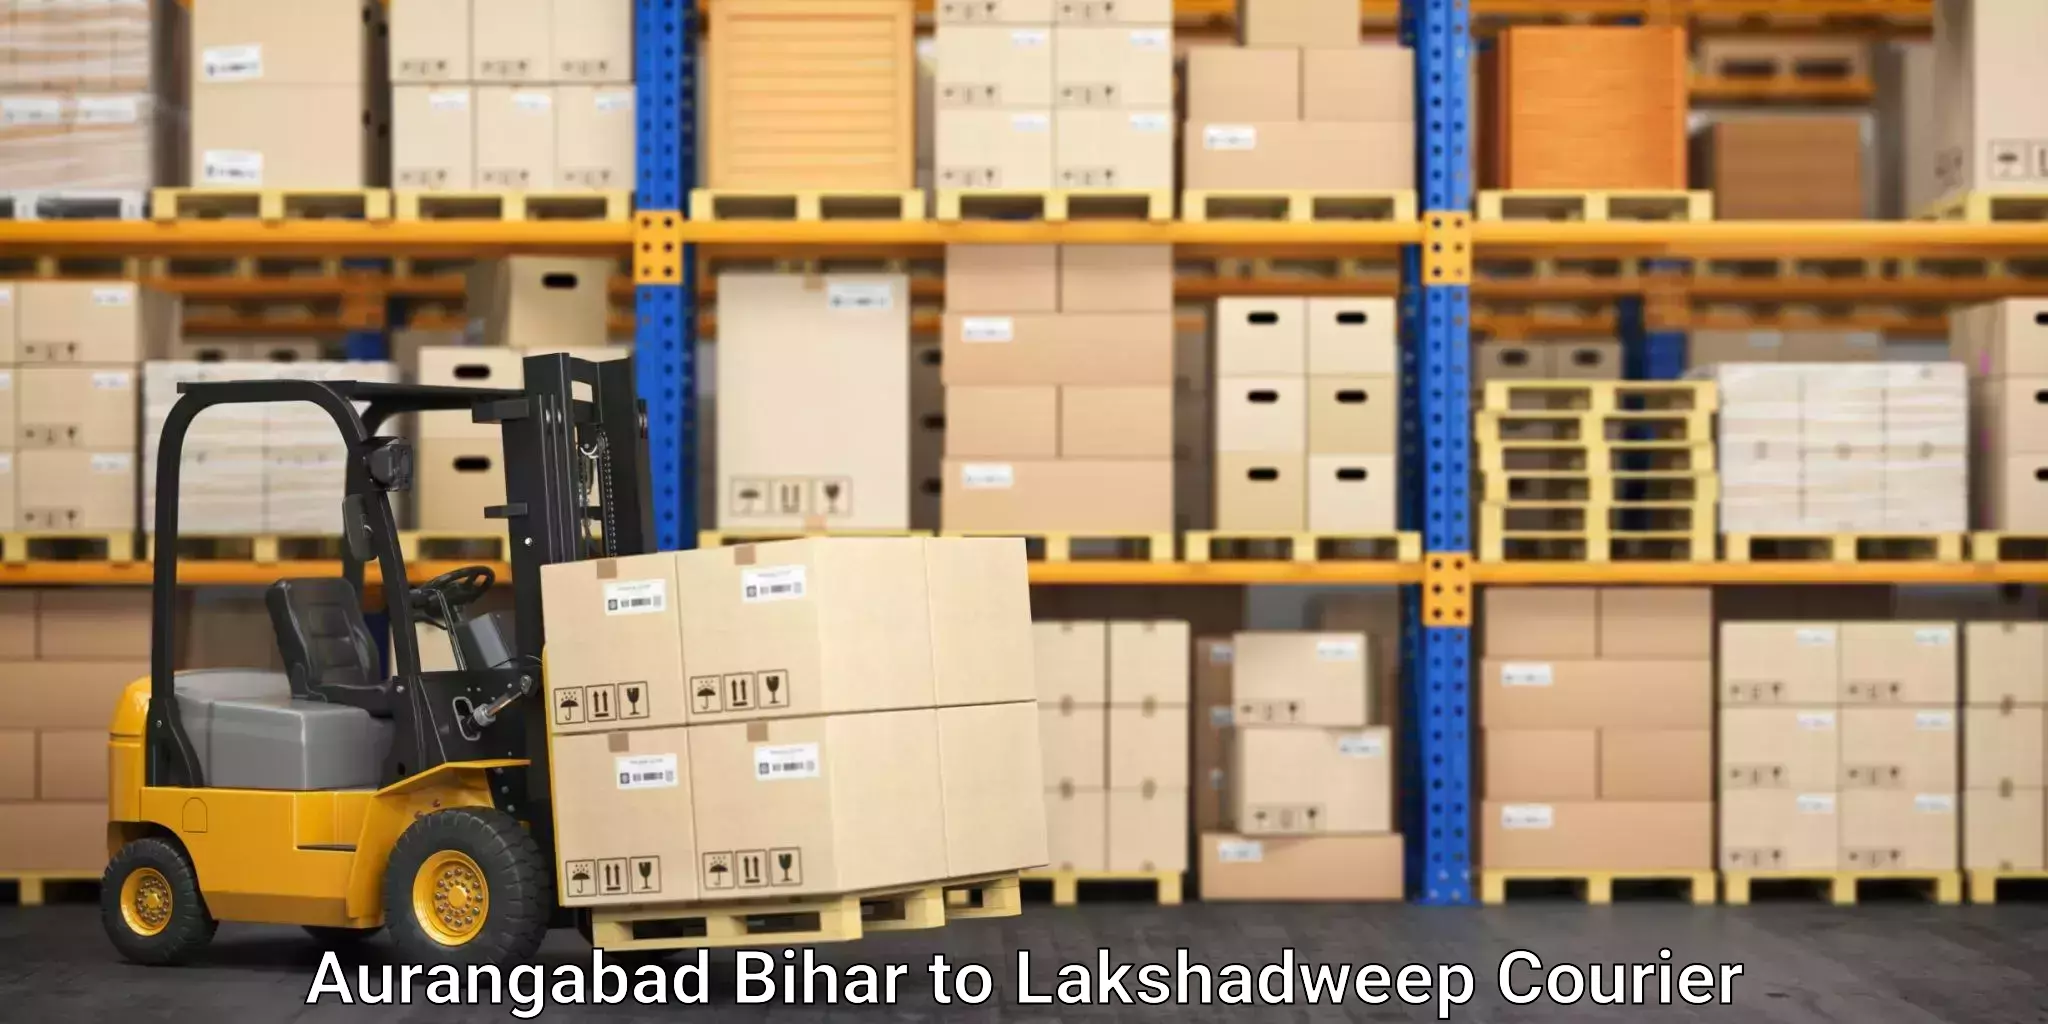 Moving and storage services in Aurangabad Bihar to Lakshadweep